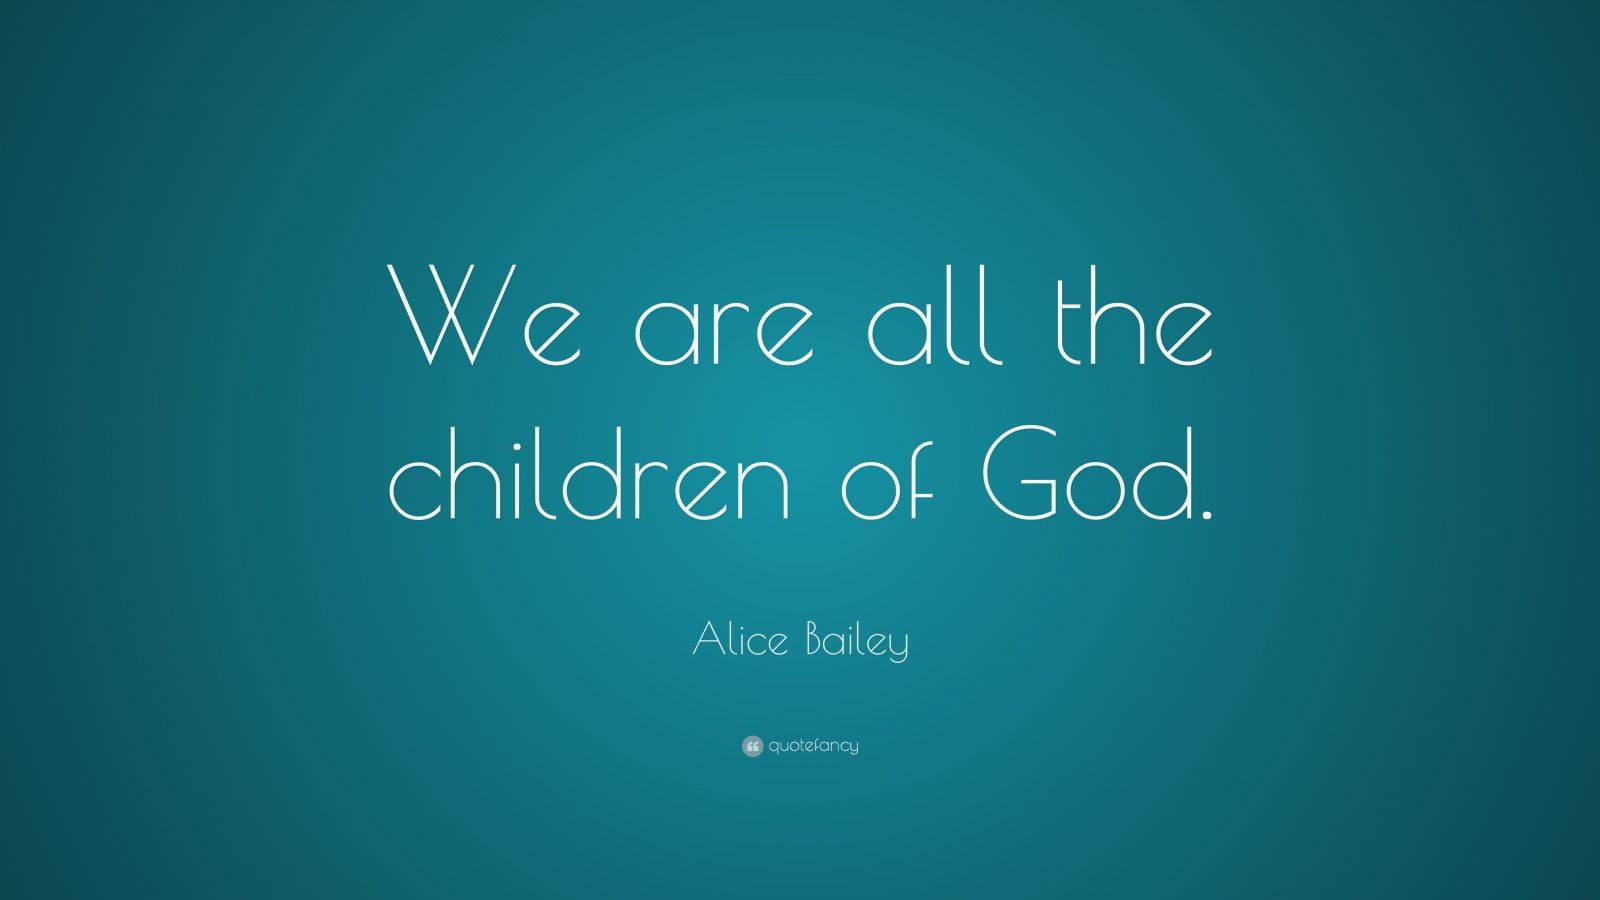 Alice Bailey Quote: “We are all the children of God.” (7 wallpapers